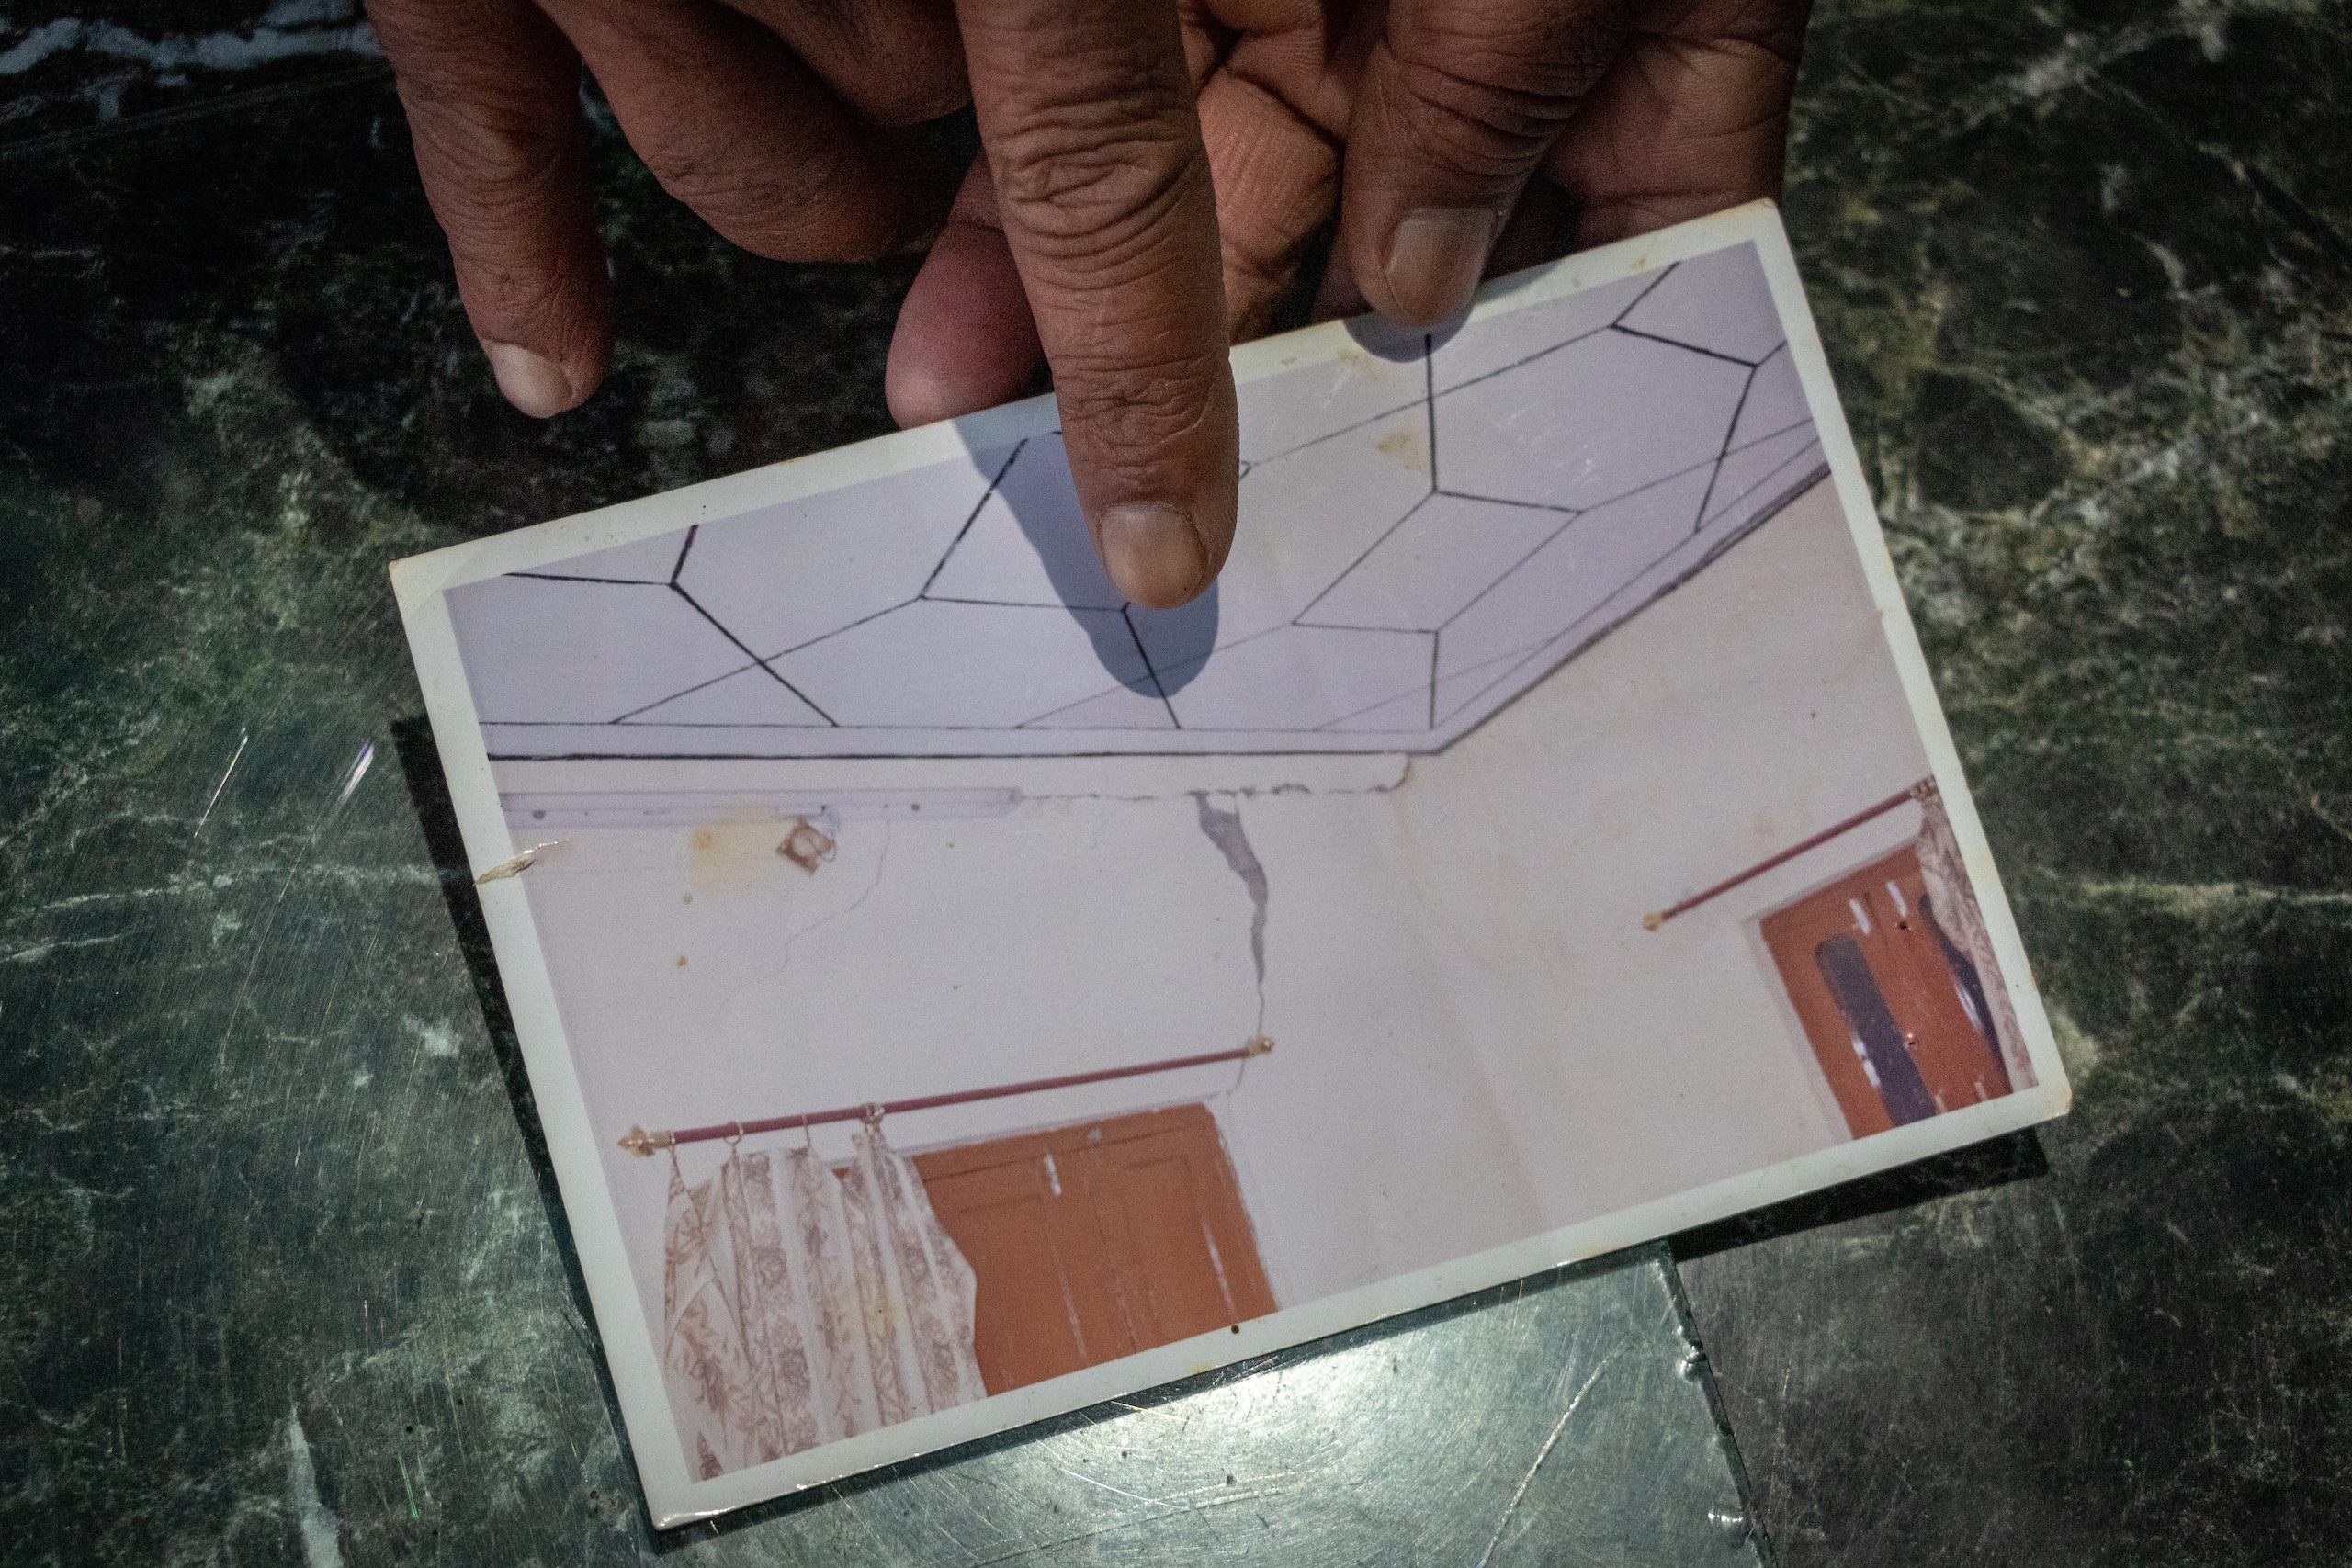 Nath shows a photograph while pointing to the cracks found on the walls of his house some 15 years back due to the construction of a dam in the nearby area of Salal. (Image: Ashish Kumar Kataria)